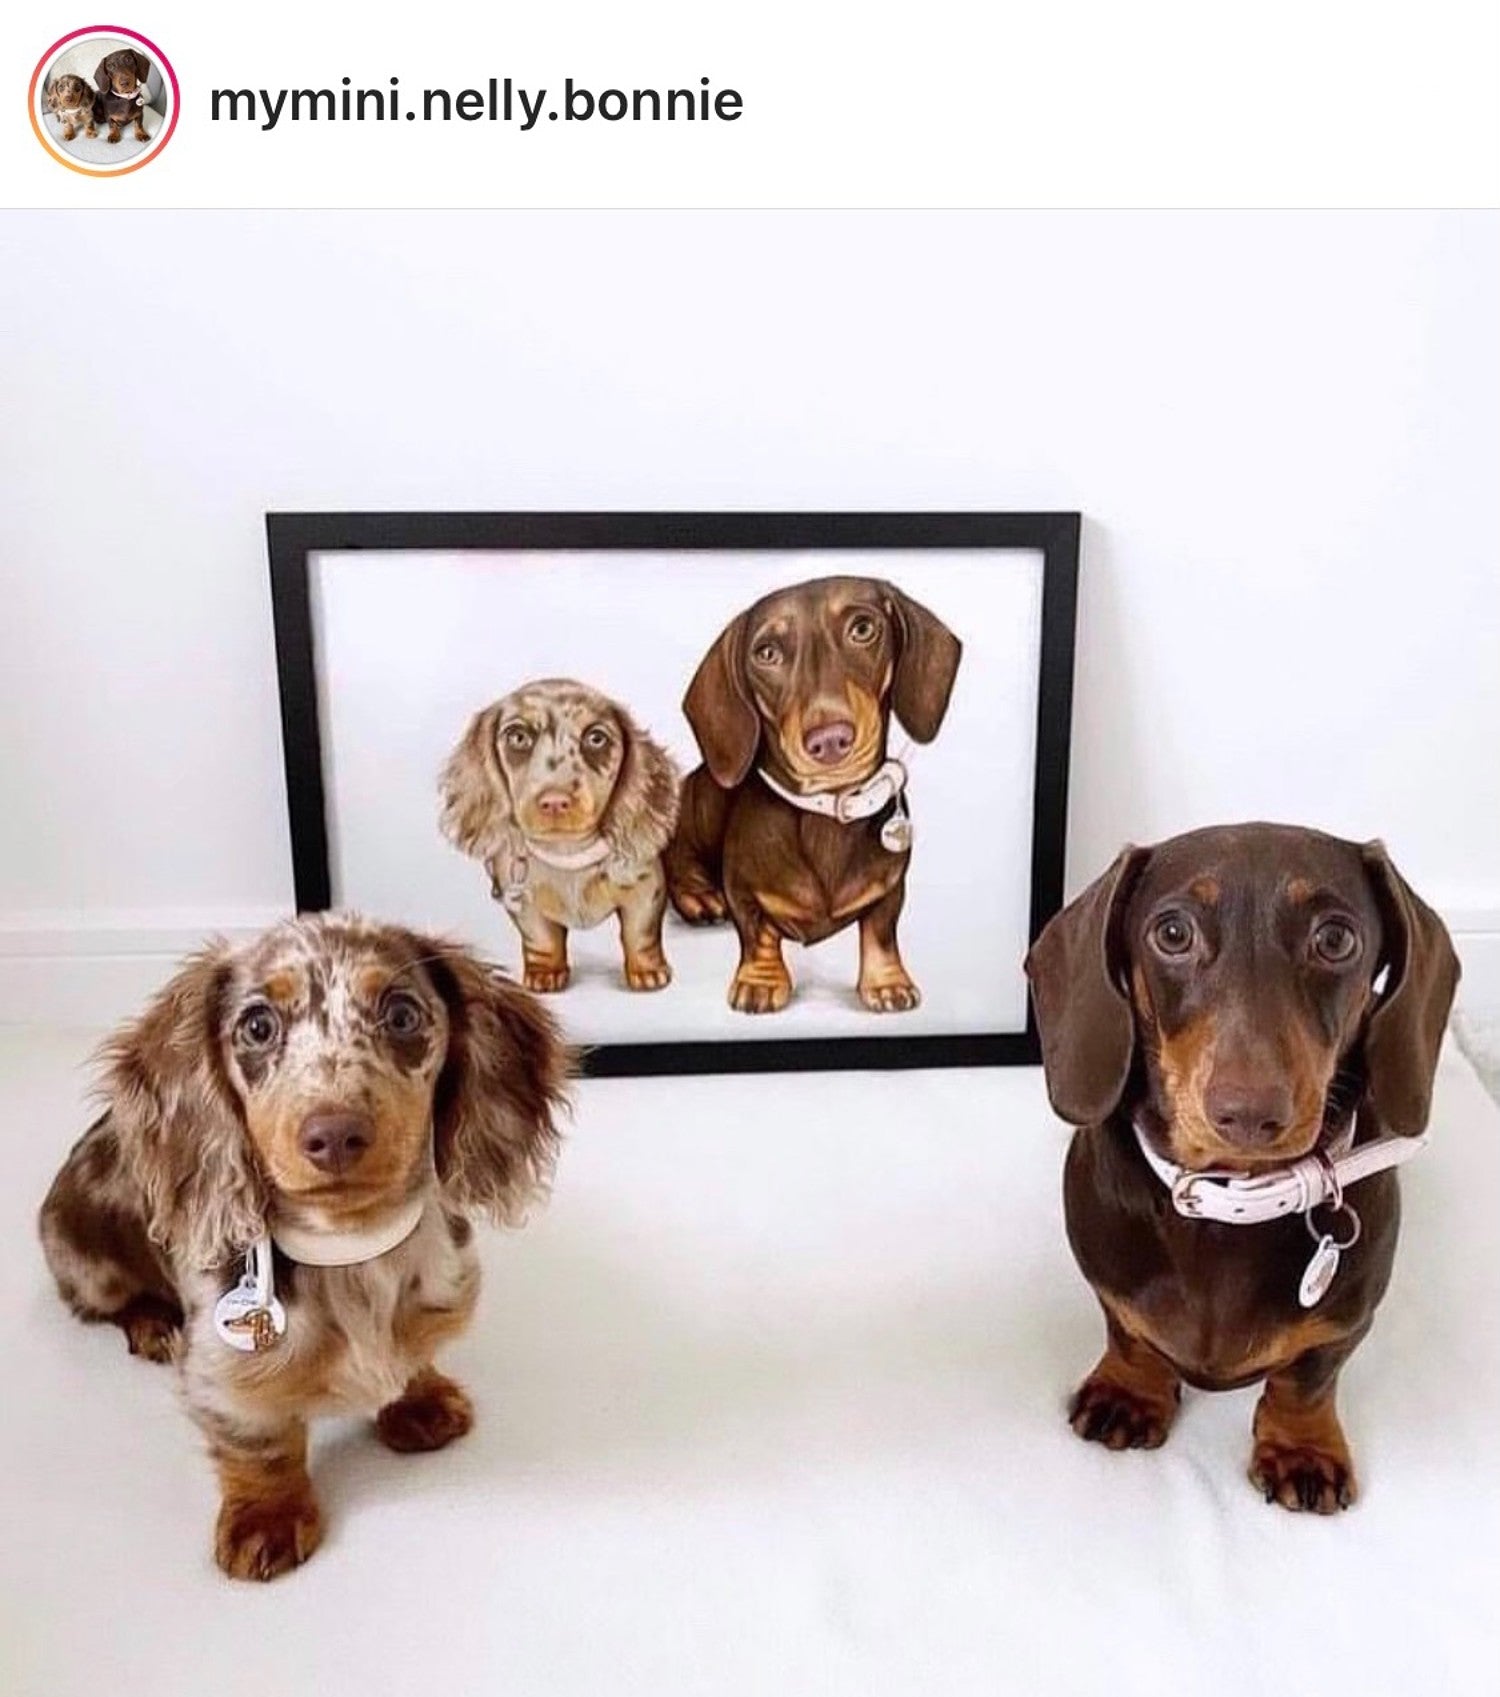 Dachshund Gifts - Pet Portrait Art by Charlotte with Miniature Dachshunds Nelly & Bonnie (via Instagram)